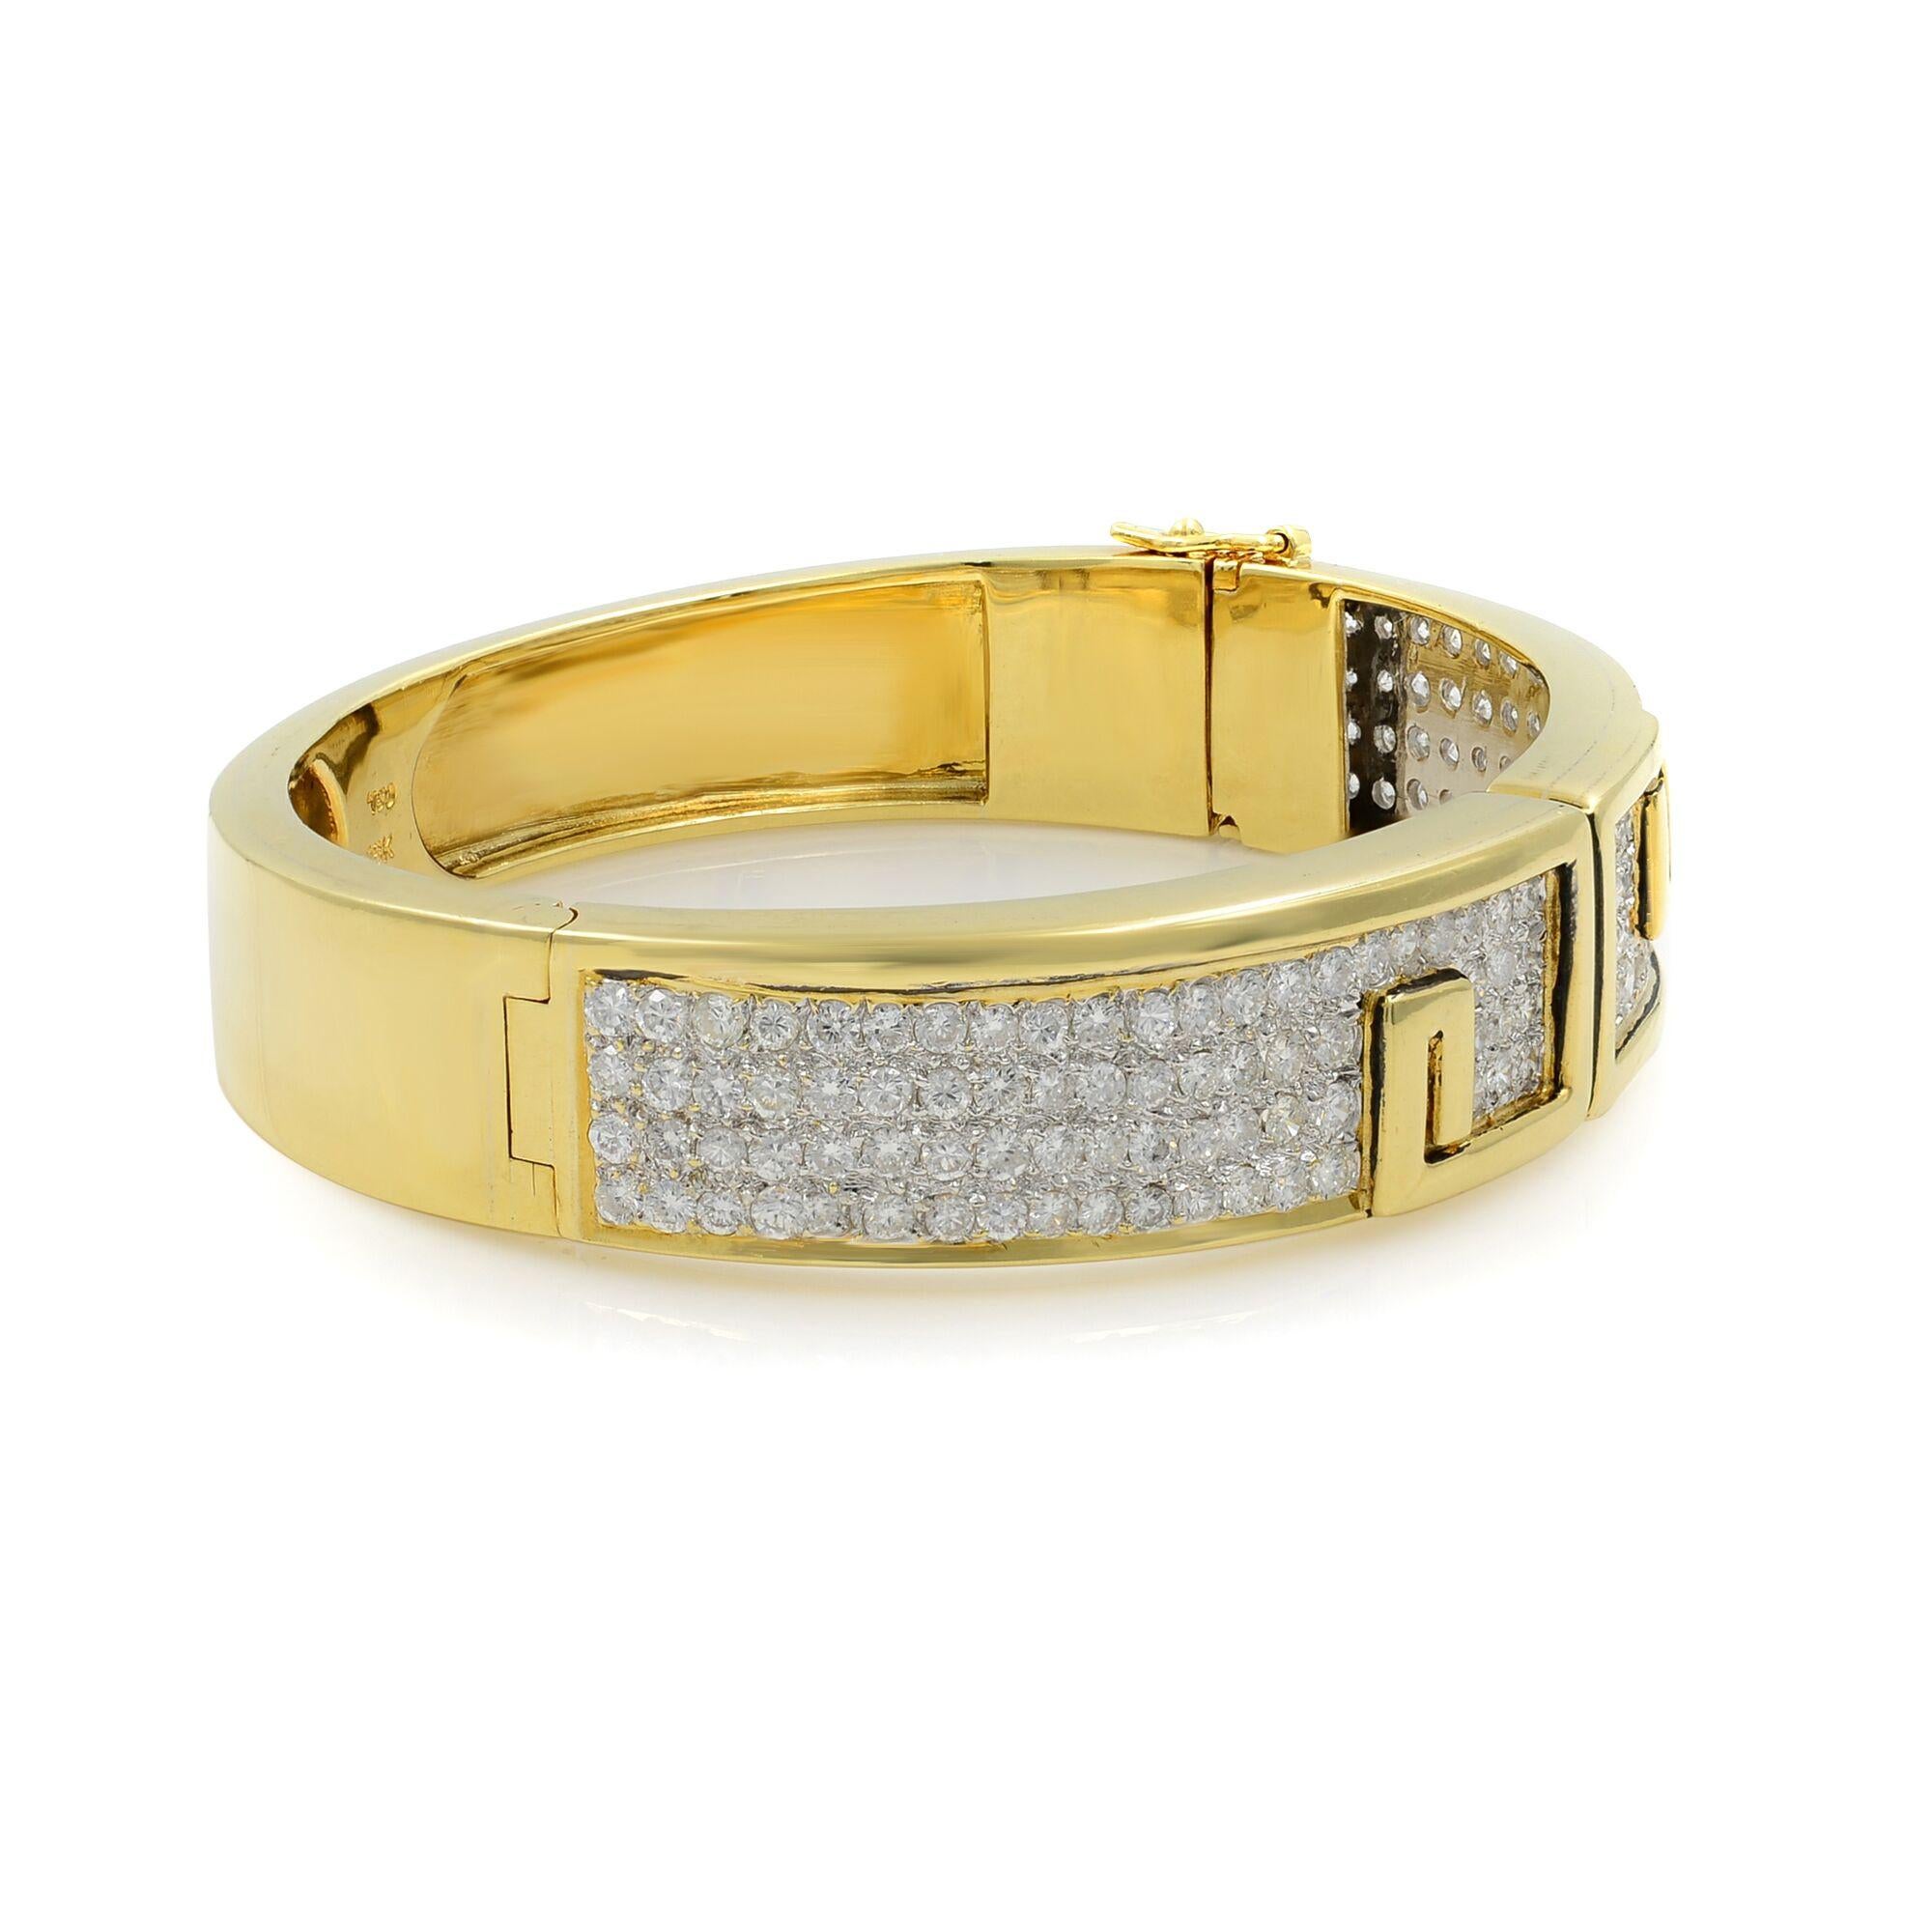 A vintage 18K yellow gold diamond bangle bracelet. A total weight of 6.00cts round cut  prong set diamonds.
Pre-owned excellent condition.
Length:6.25 inch
Width: 13.55mm 
Weight: 53.27 grams.